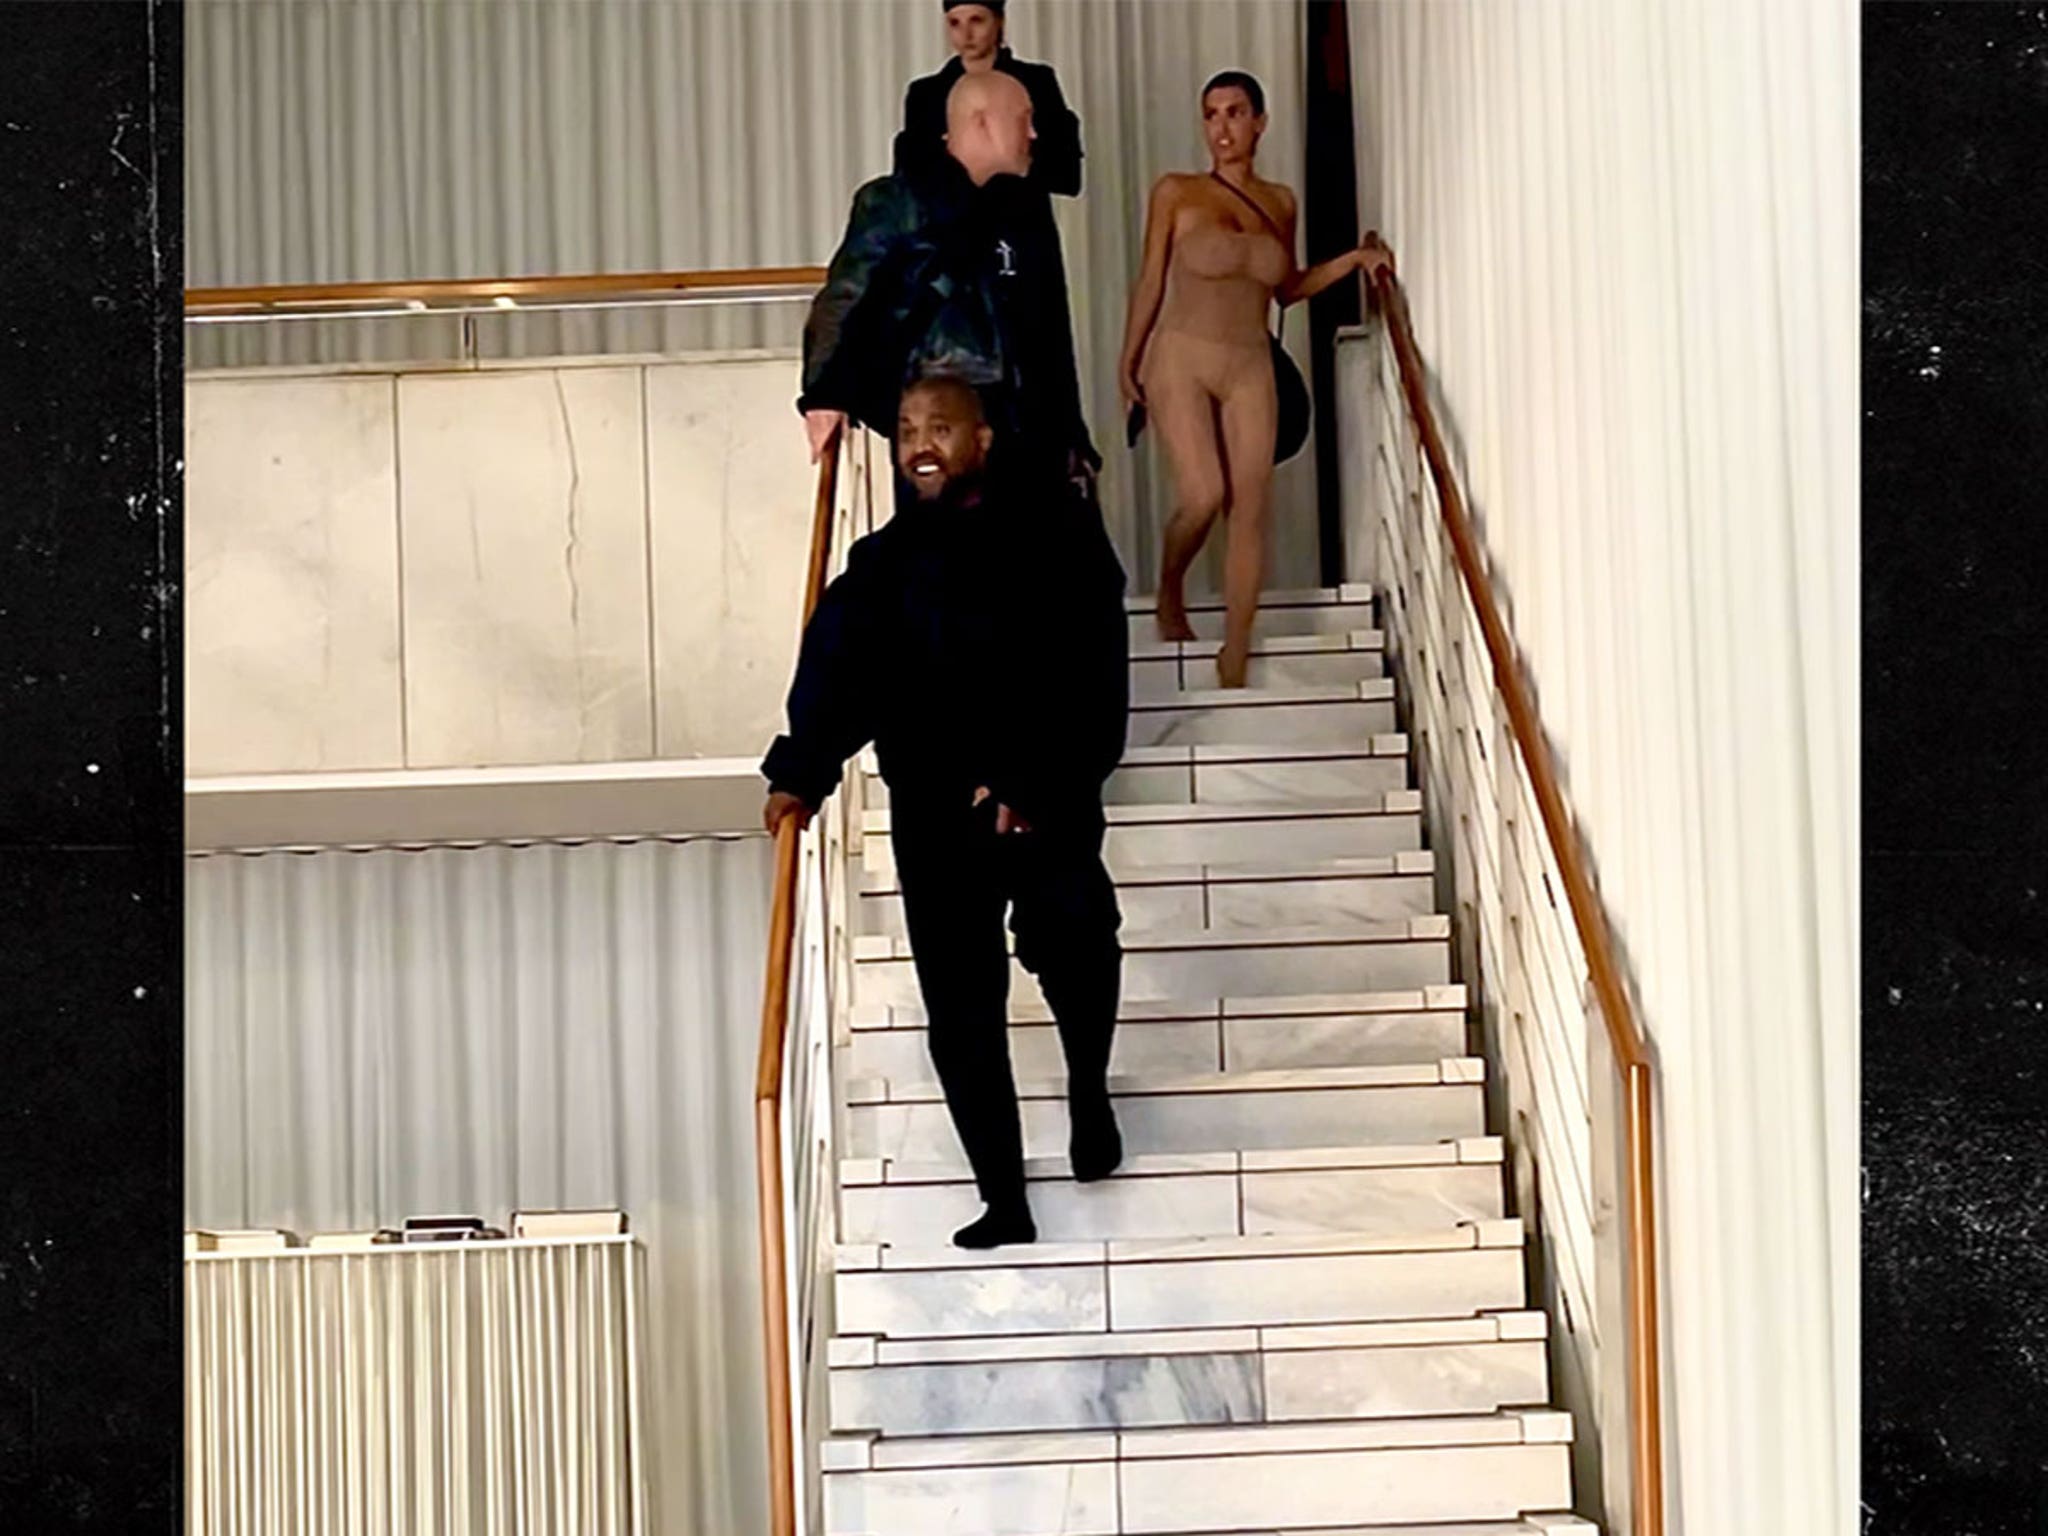 Bianca Censori Shows Off Bare Breasts in Sheer Top With Kanye West